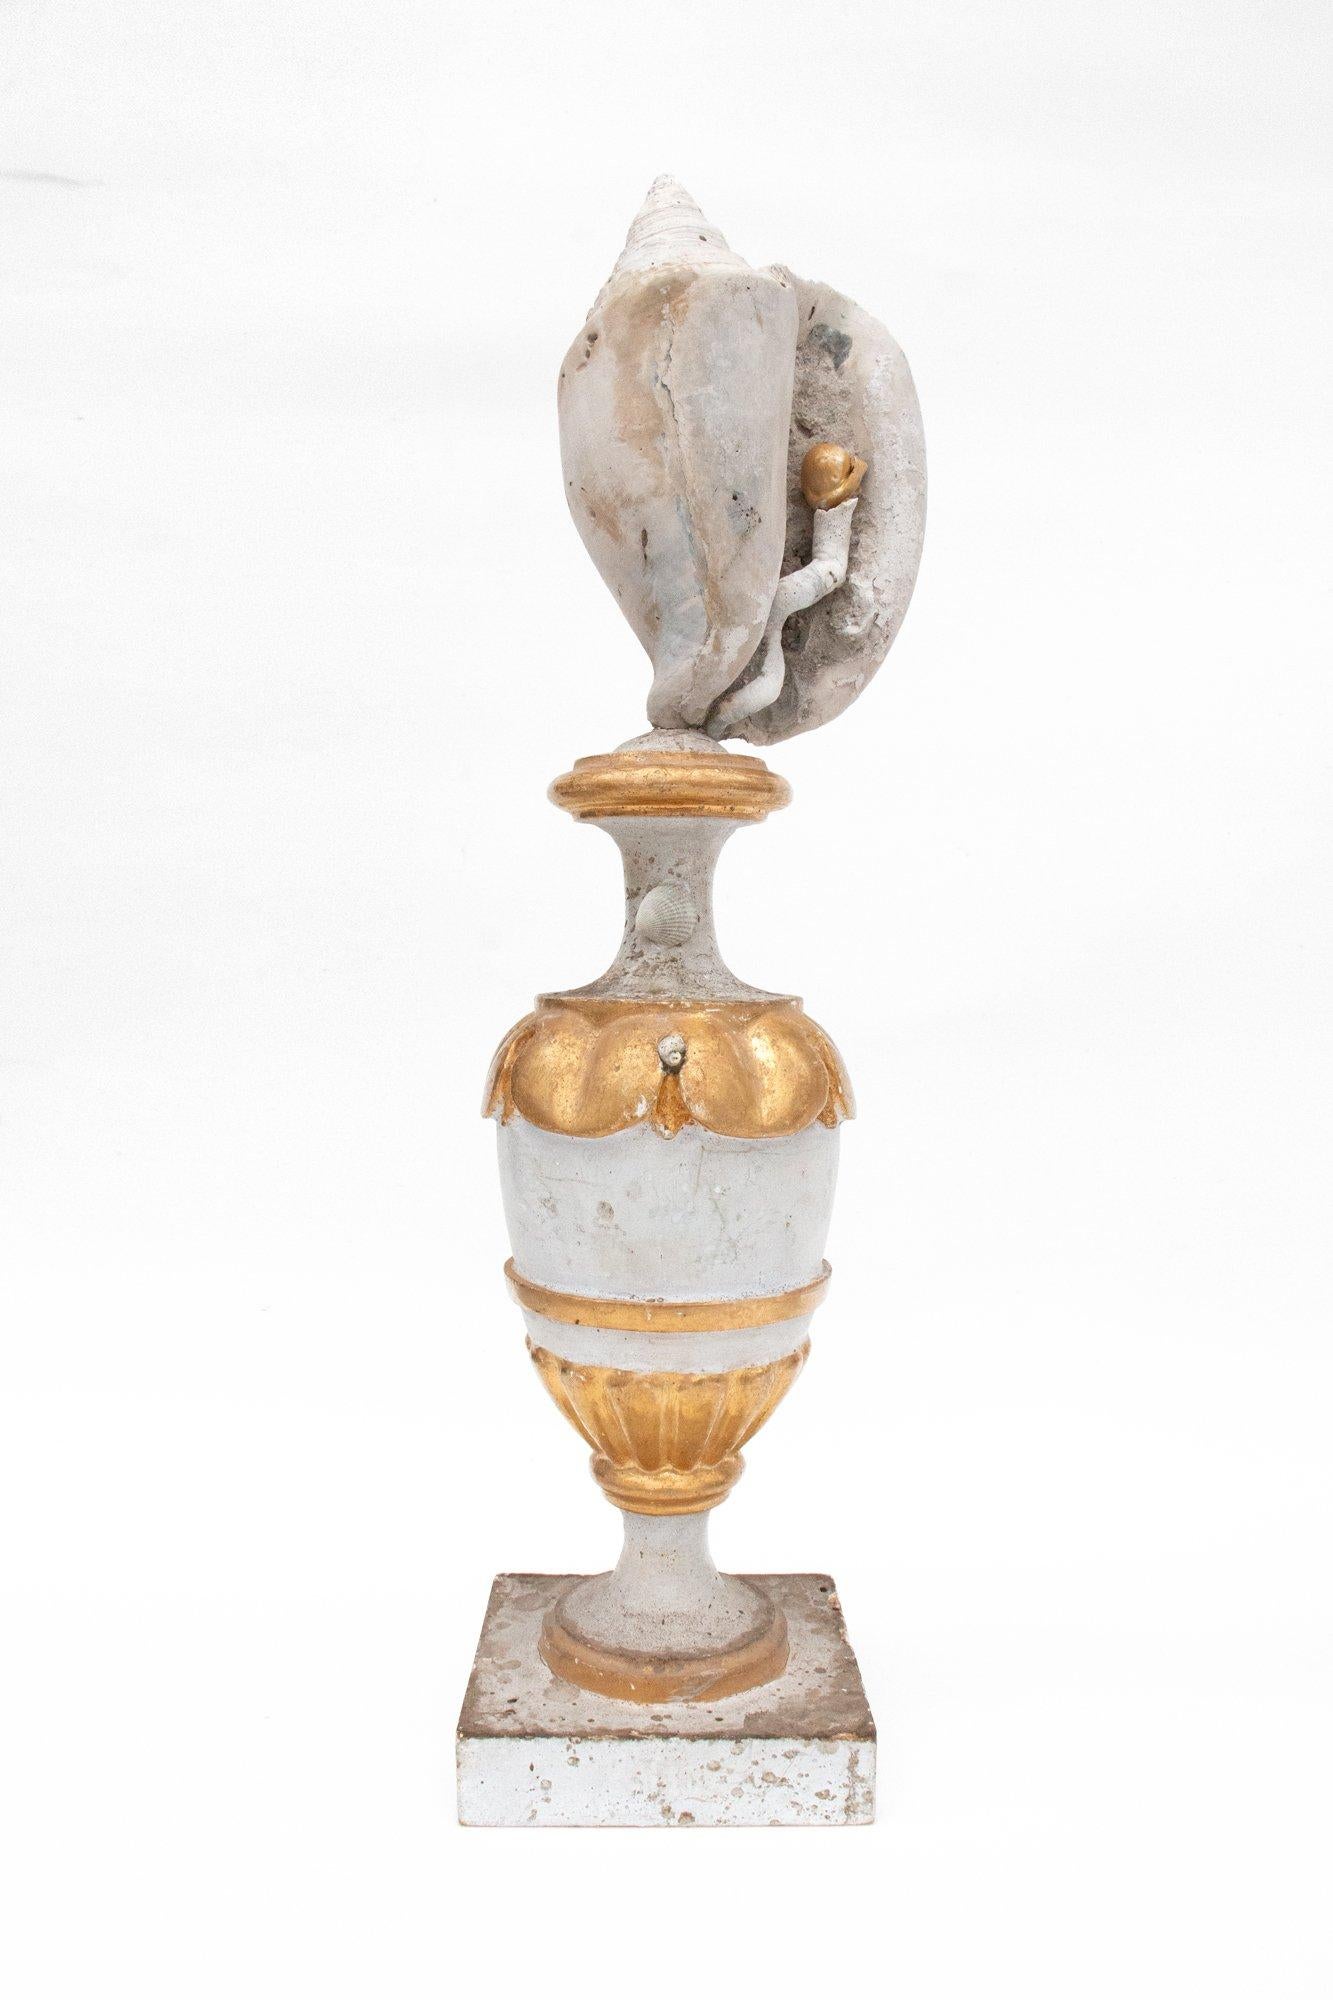 A pair of 18th century Italian gold leaf church altar vases decorated with fossil shells, siliquaria, and natural forming baroque pearls. The vases originally came from a church in Arezzo, Italy. They are hand-carved and hand-painted by nuns in a